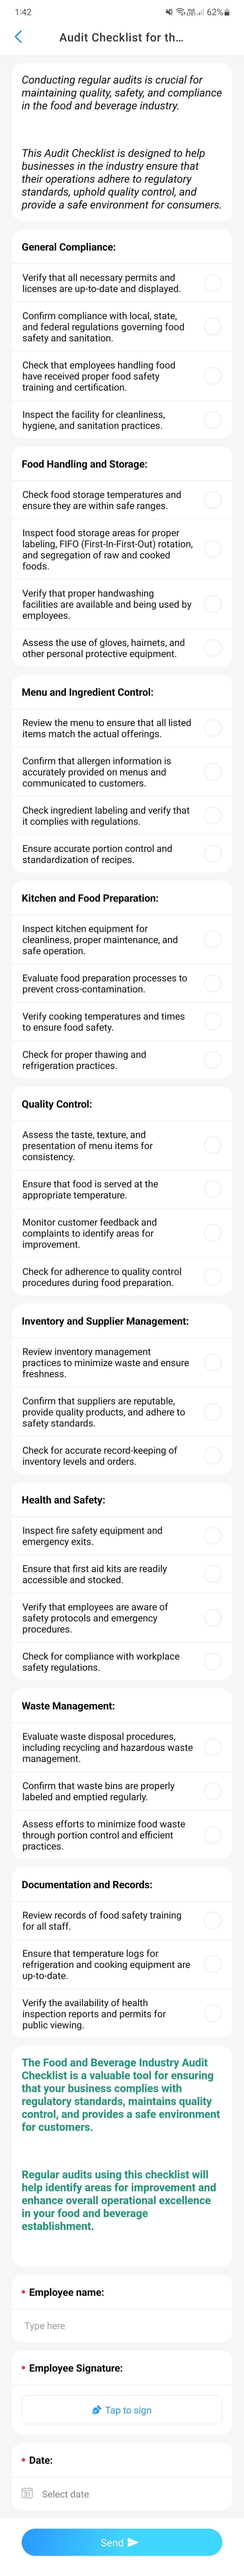 Audit Checklist for the Food and Beverage Industry Template